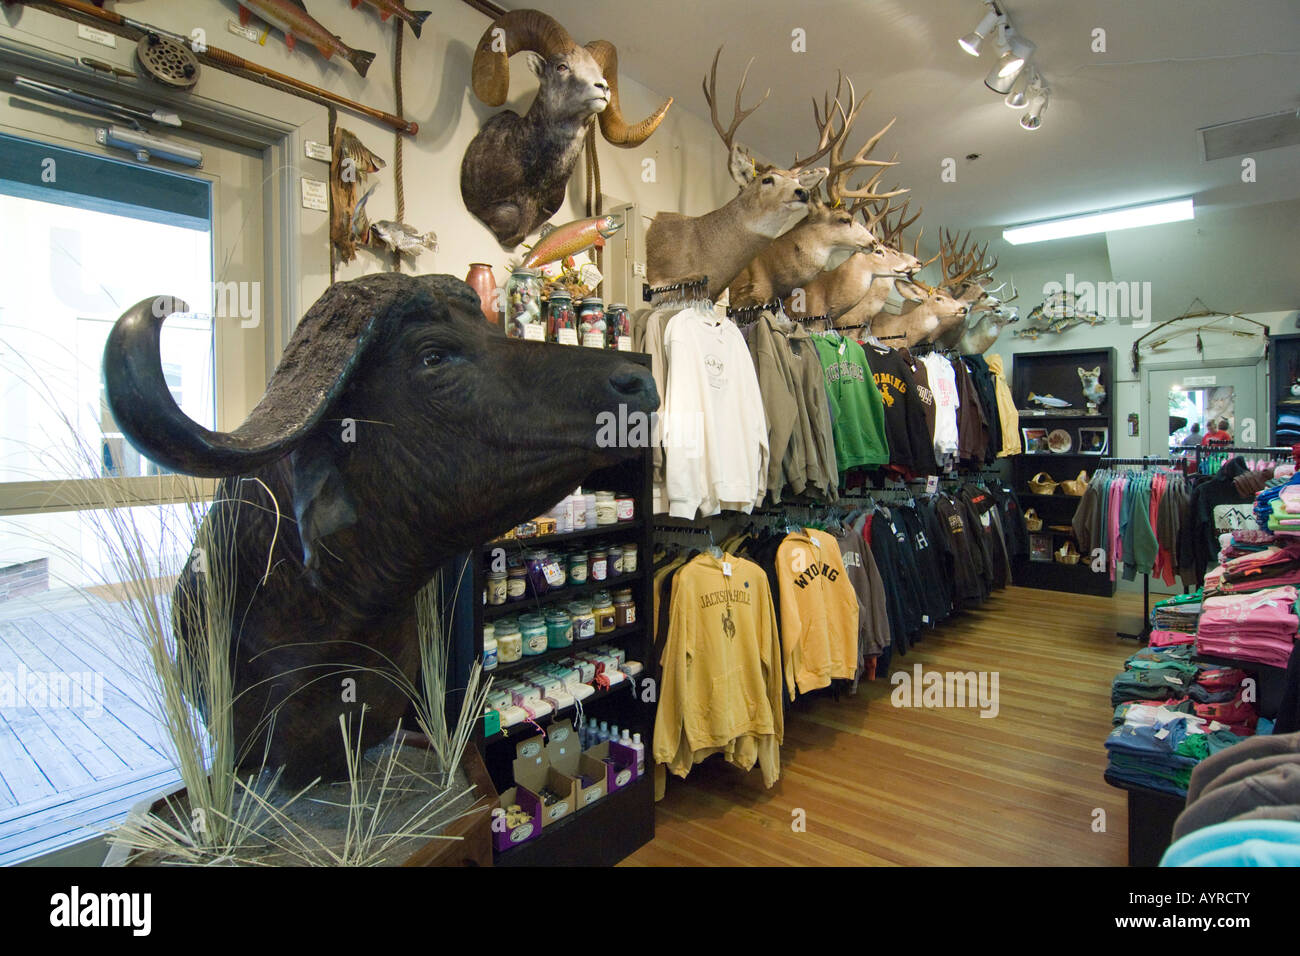 Stuffed buffalo in a store along with other kitsch in Jackson, Wyoming, USA Stock Photo